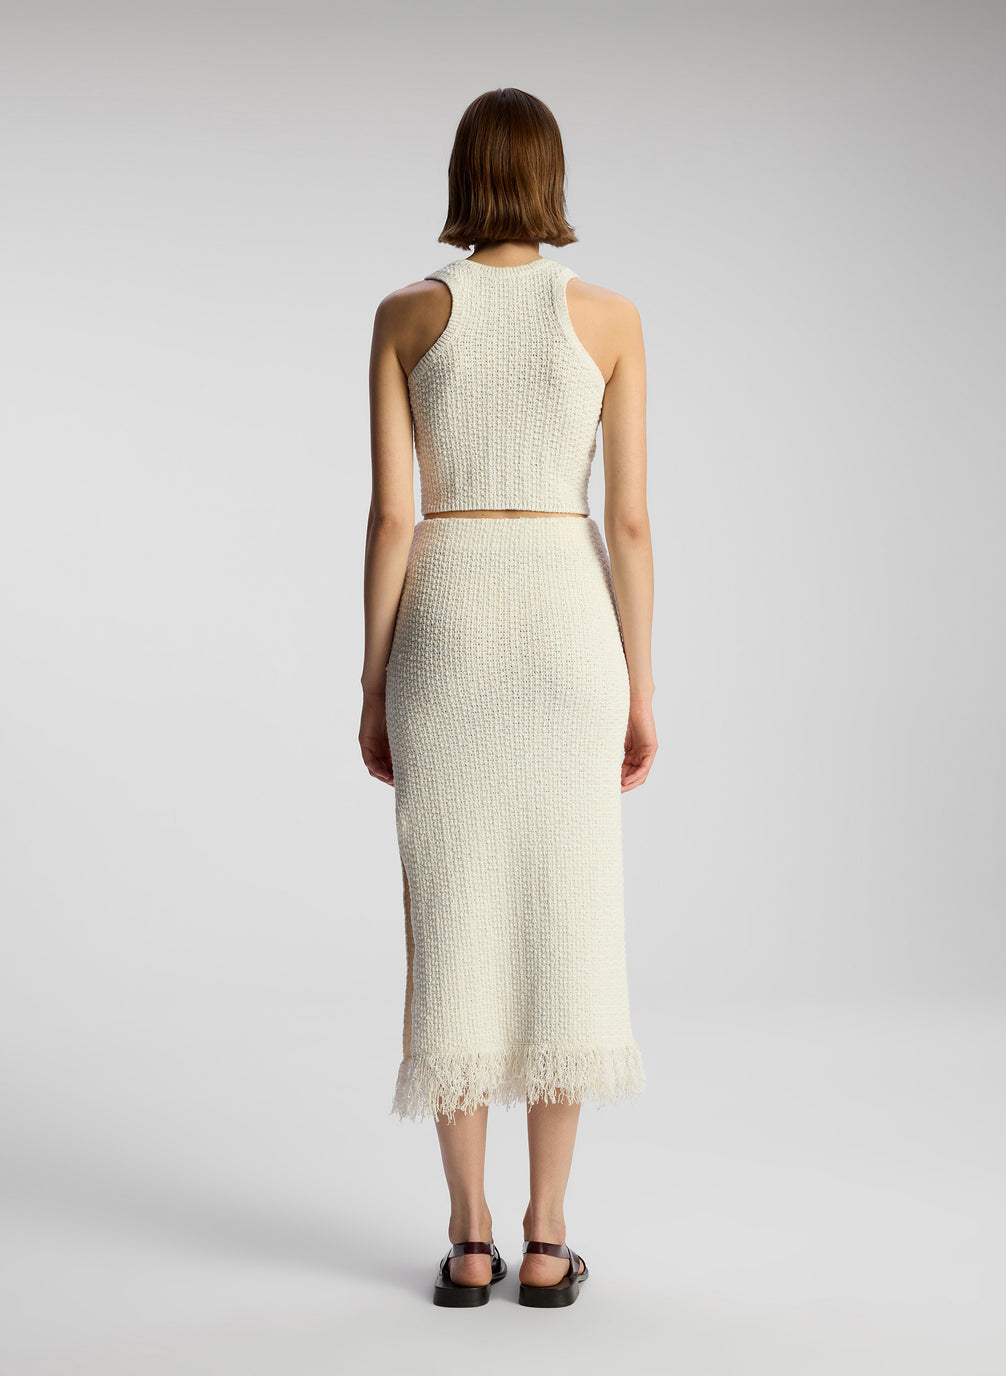 back view of woman wearing white knit sleeveless top and matching skirt